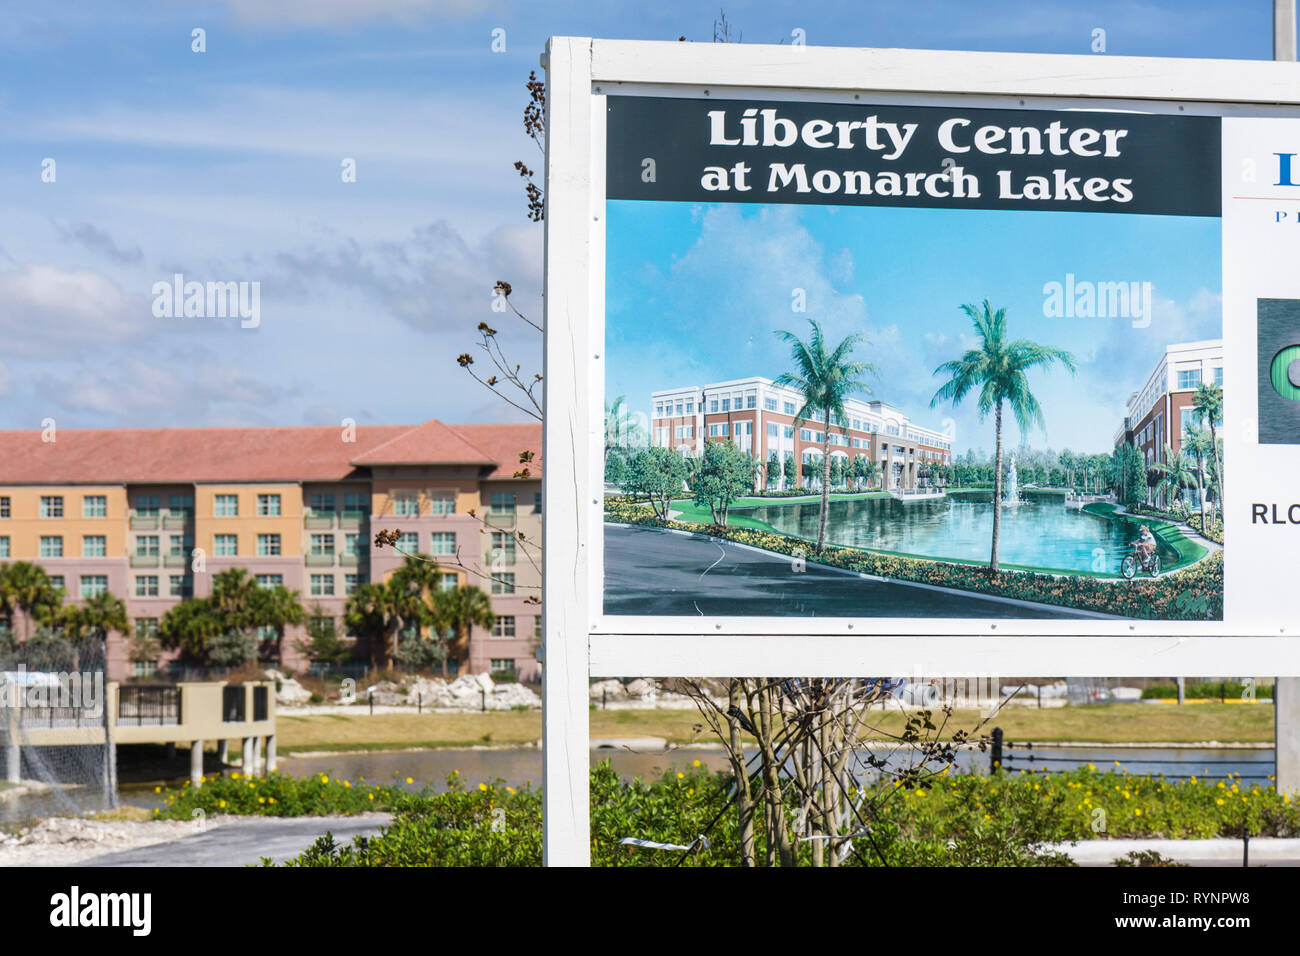 Florida Miramar,Liberty Center at Monarch Lakes,corporate park,sign,commercial real estate,building,landscaping,palm trees,architectural drawing,FL090 Stock Photo